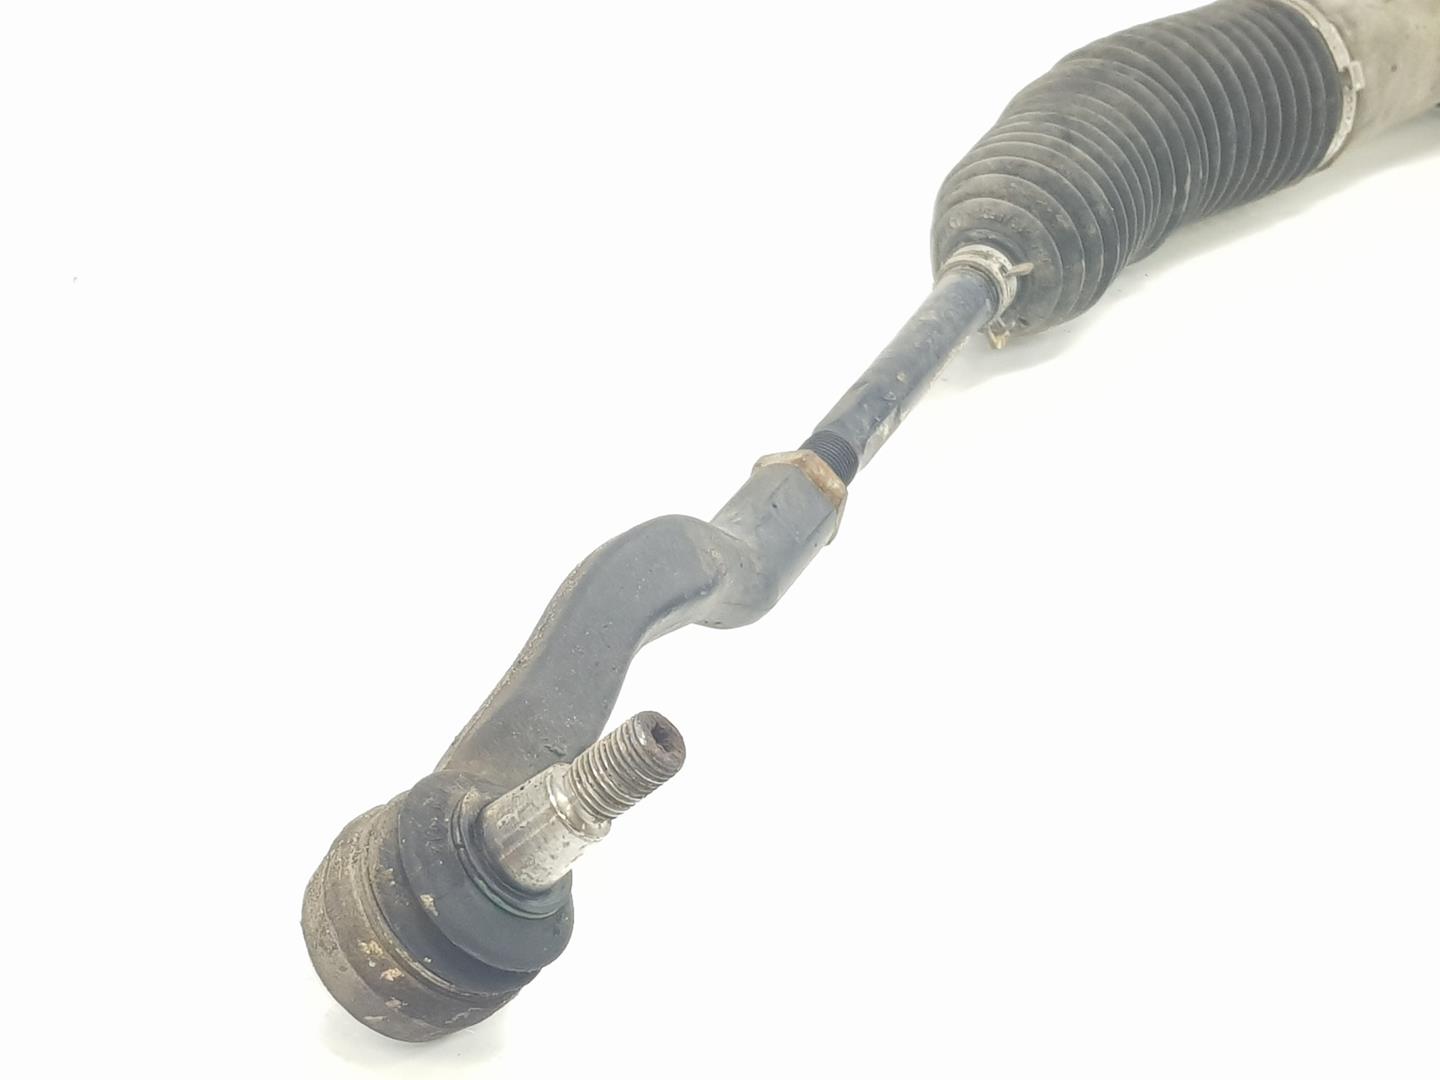 MERCEDES-BENZ Viano W639 (2003-2015) Steering Rack A6394601000, A6394601000 24236371